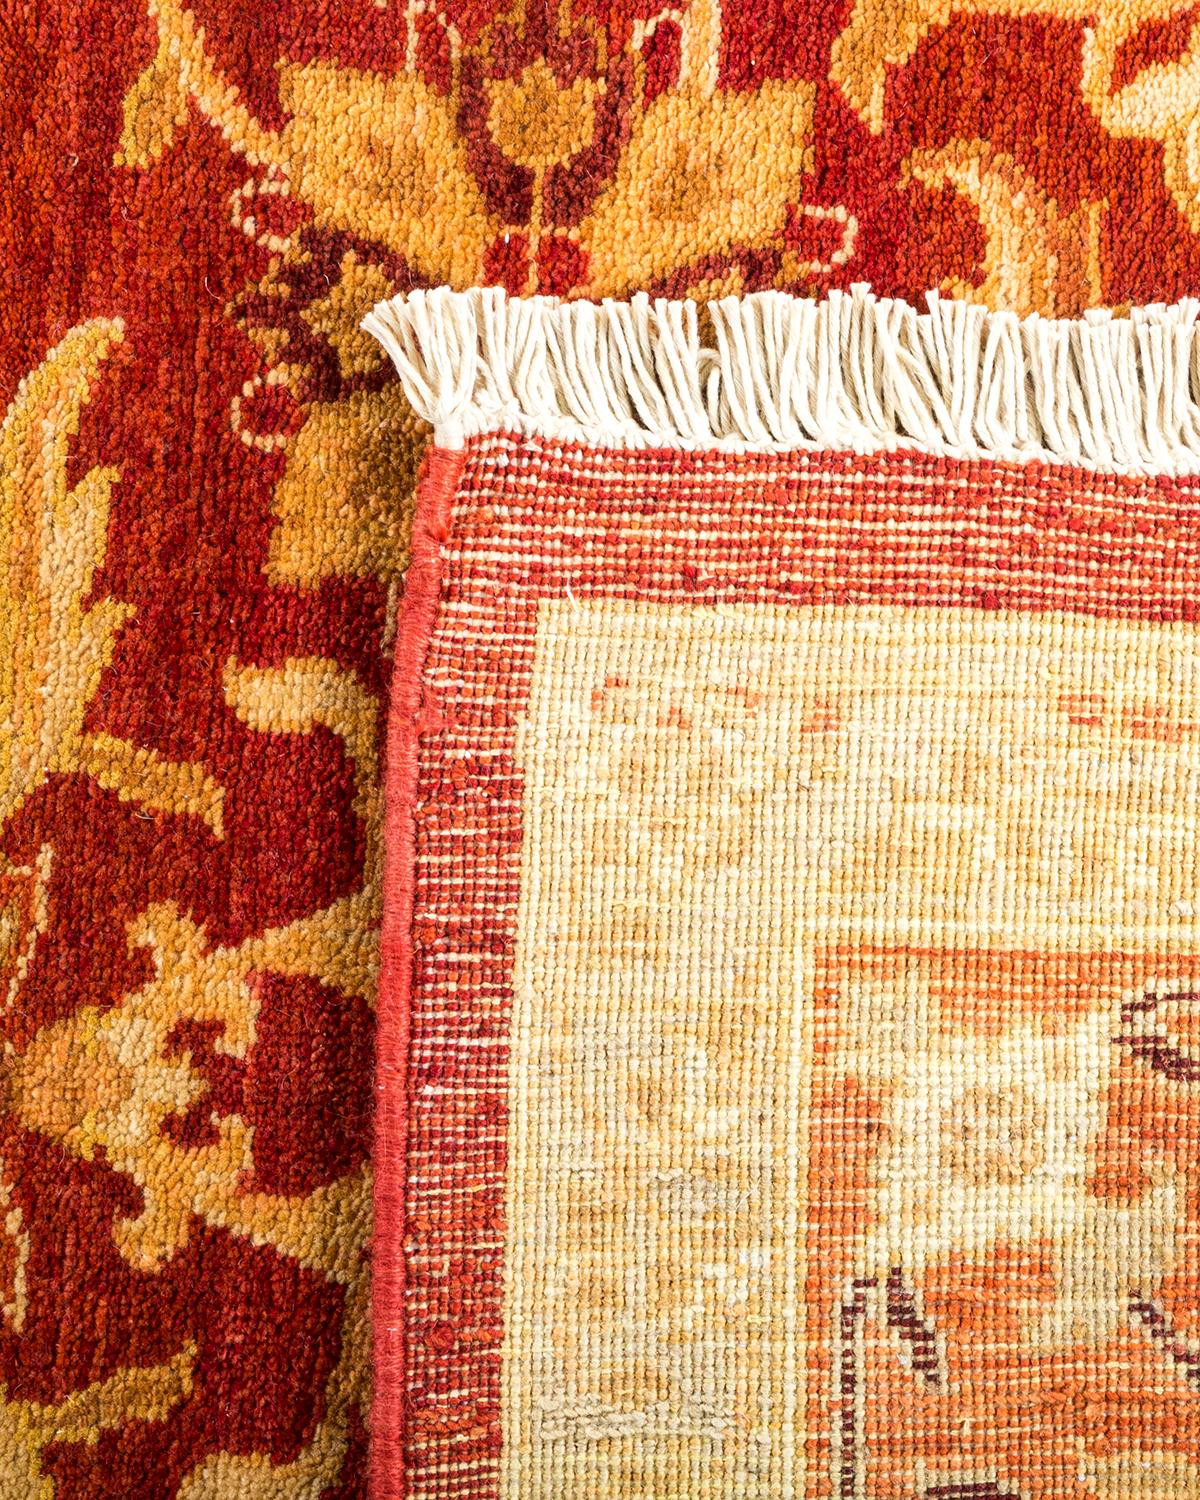 Hand-Knotted One-of-a-kind Hand Made Contemporary Eclectic Orange Area Rug For Sale